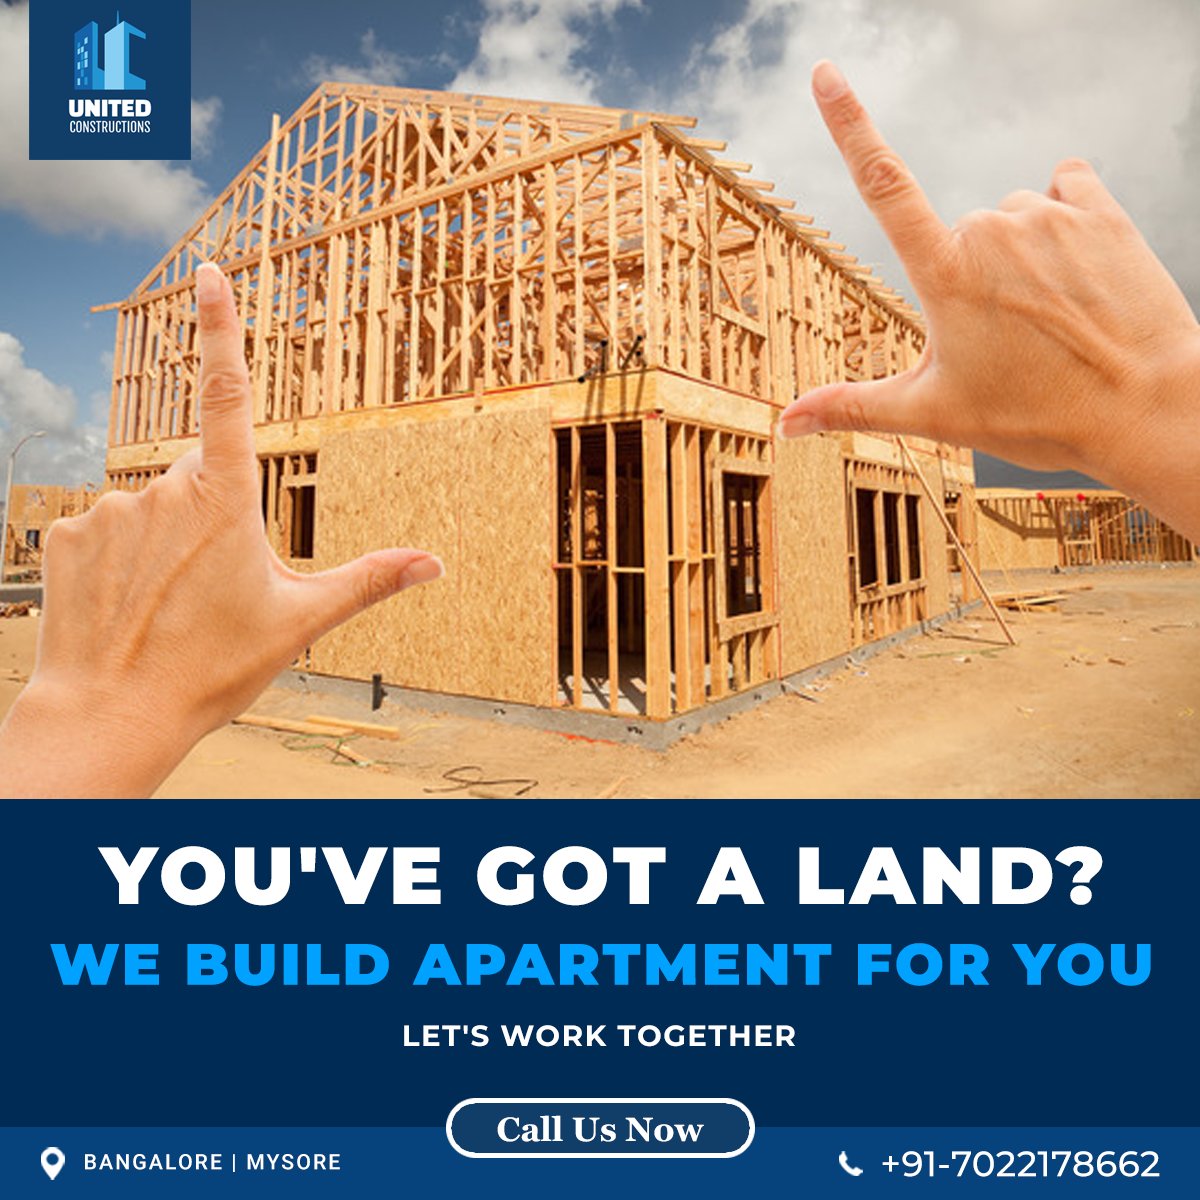 You have got land? We build an apartment for you.
Let's work together as a joint venture!
#LetsWorkTogether
Contact us now:+91 7022178662
#builders #construction #building #residential #commercial #jointventure #yourland #buildersoftomorrow #unitedconstructions #bengaluru #mysuru